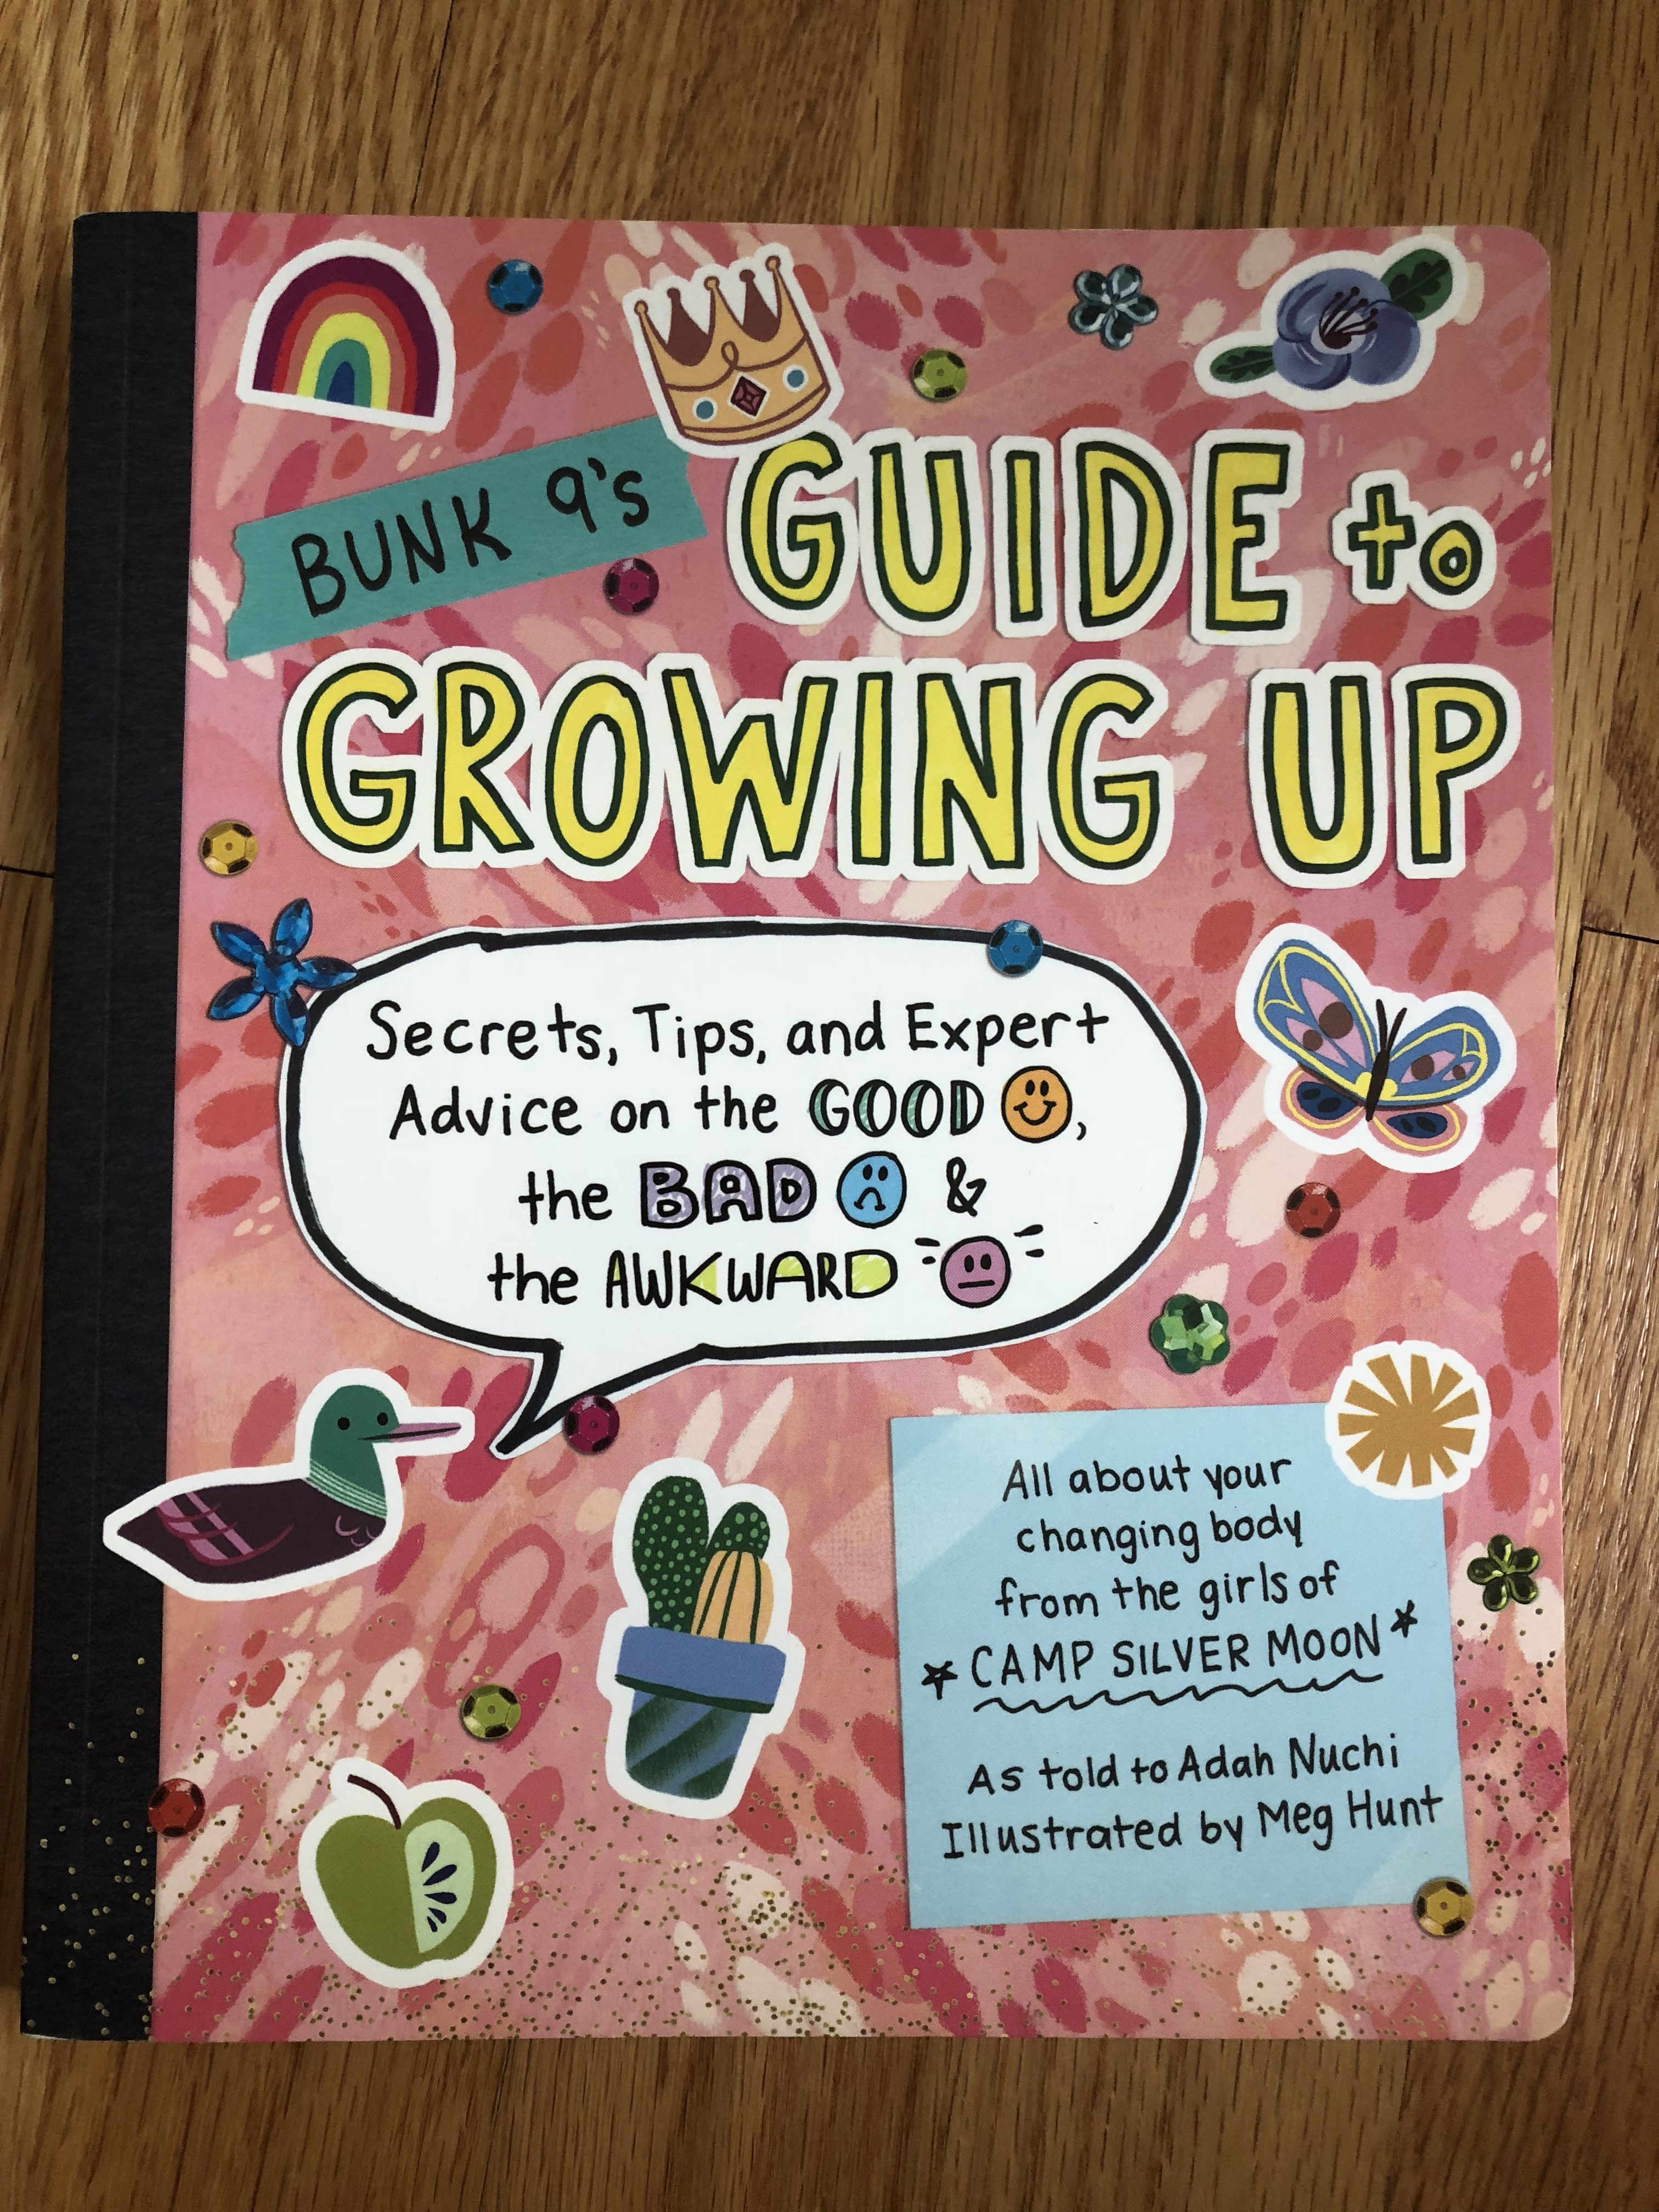 Bunk 9's Guide to Growing Up- Book Review